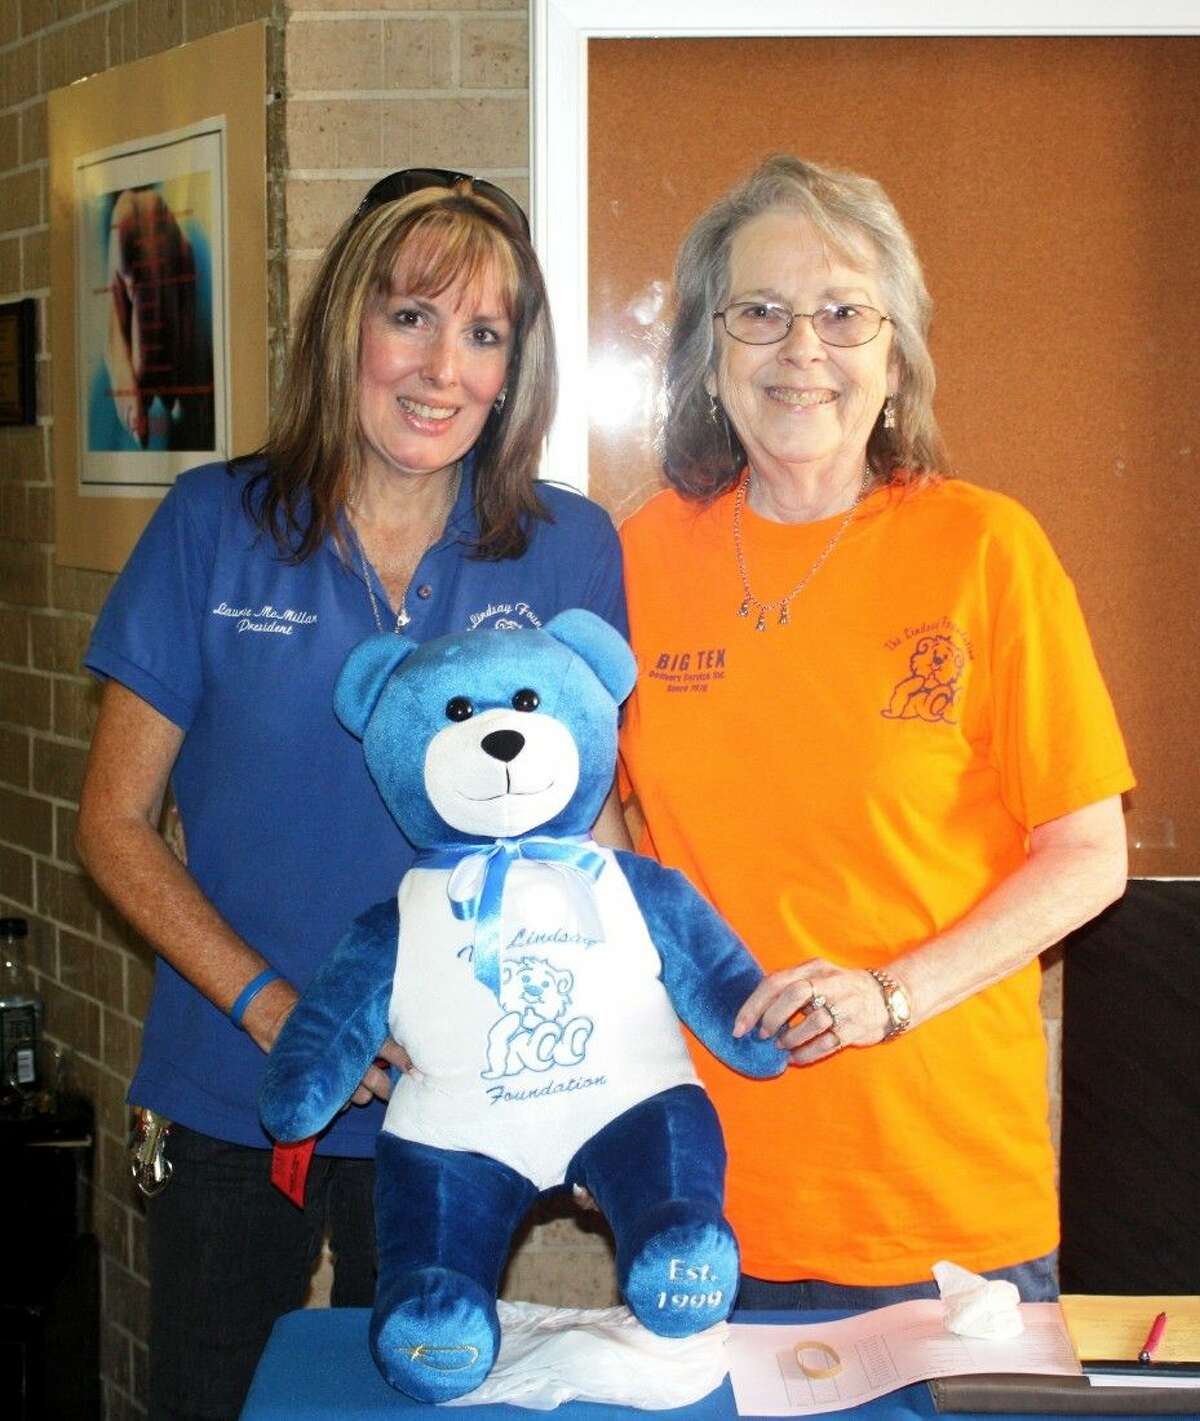 Laurie McMillan and her mother Helen, founders of The Lindsay Foundation, were on hand for the Ride for the Bear event, which was held on Saturday, Oct. 3.